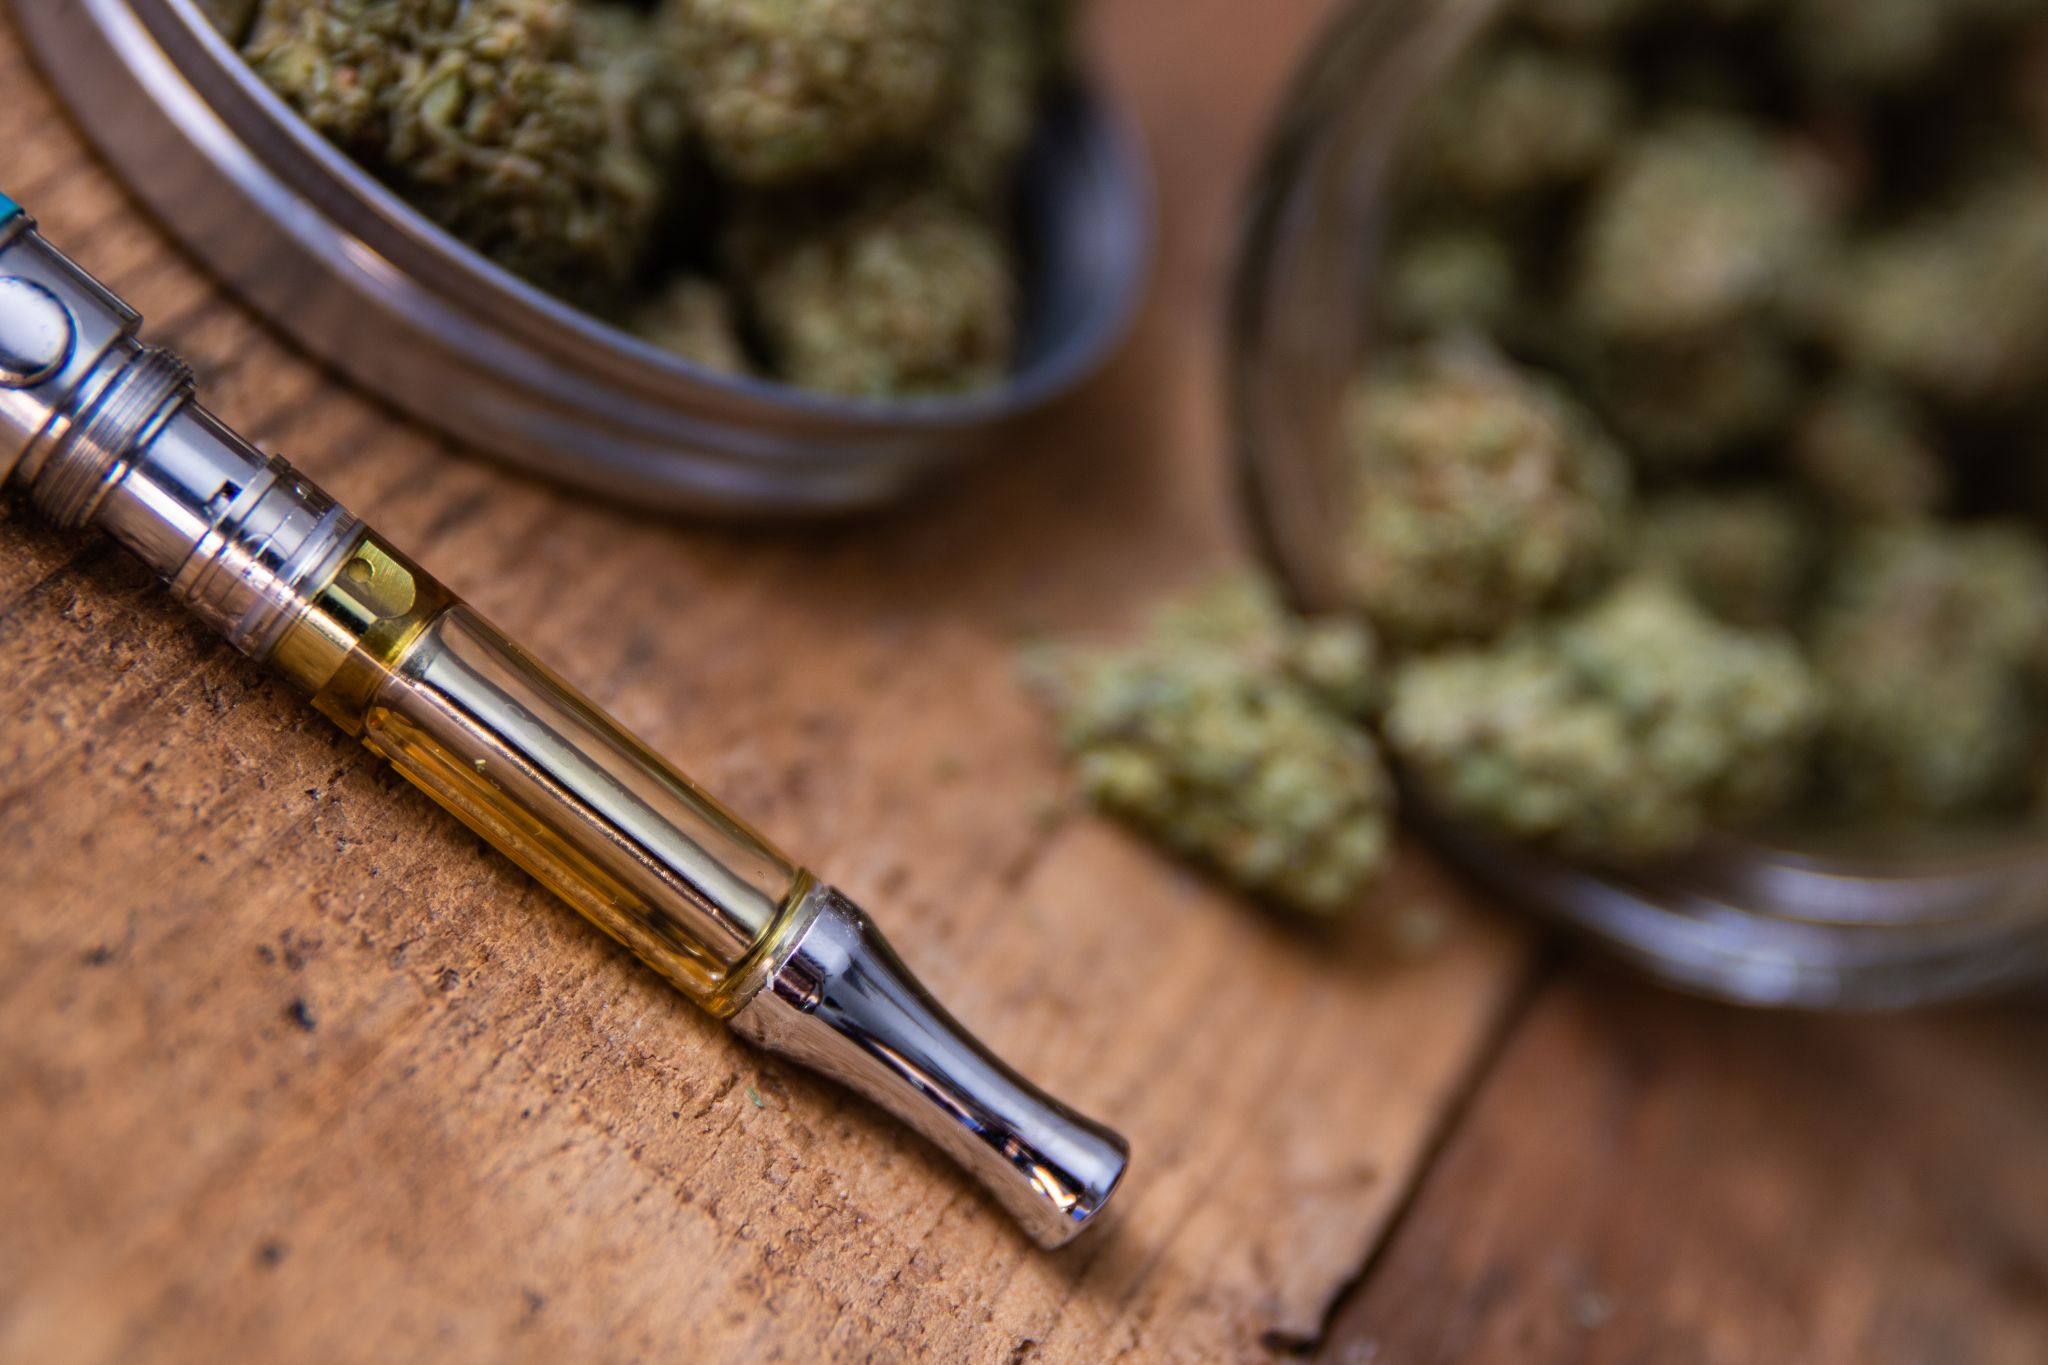 Dabs & Vaping: Felony Marijuana Charges for Concentrates in